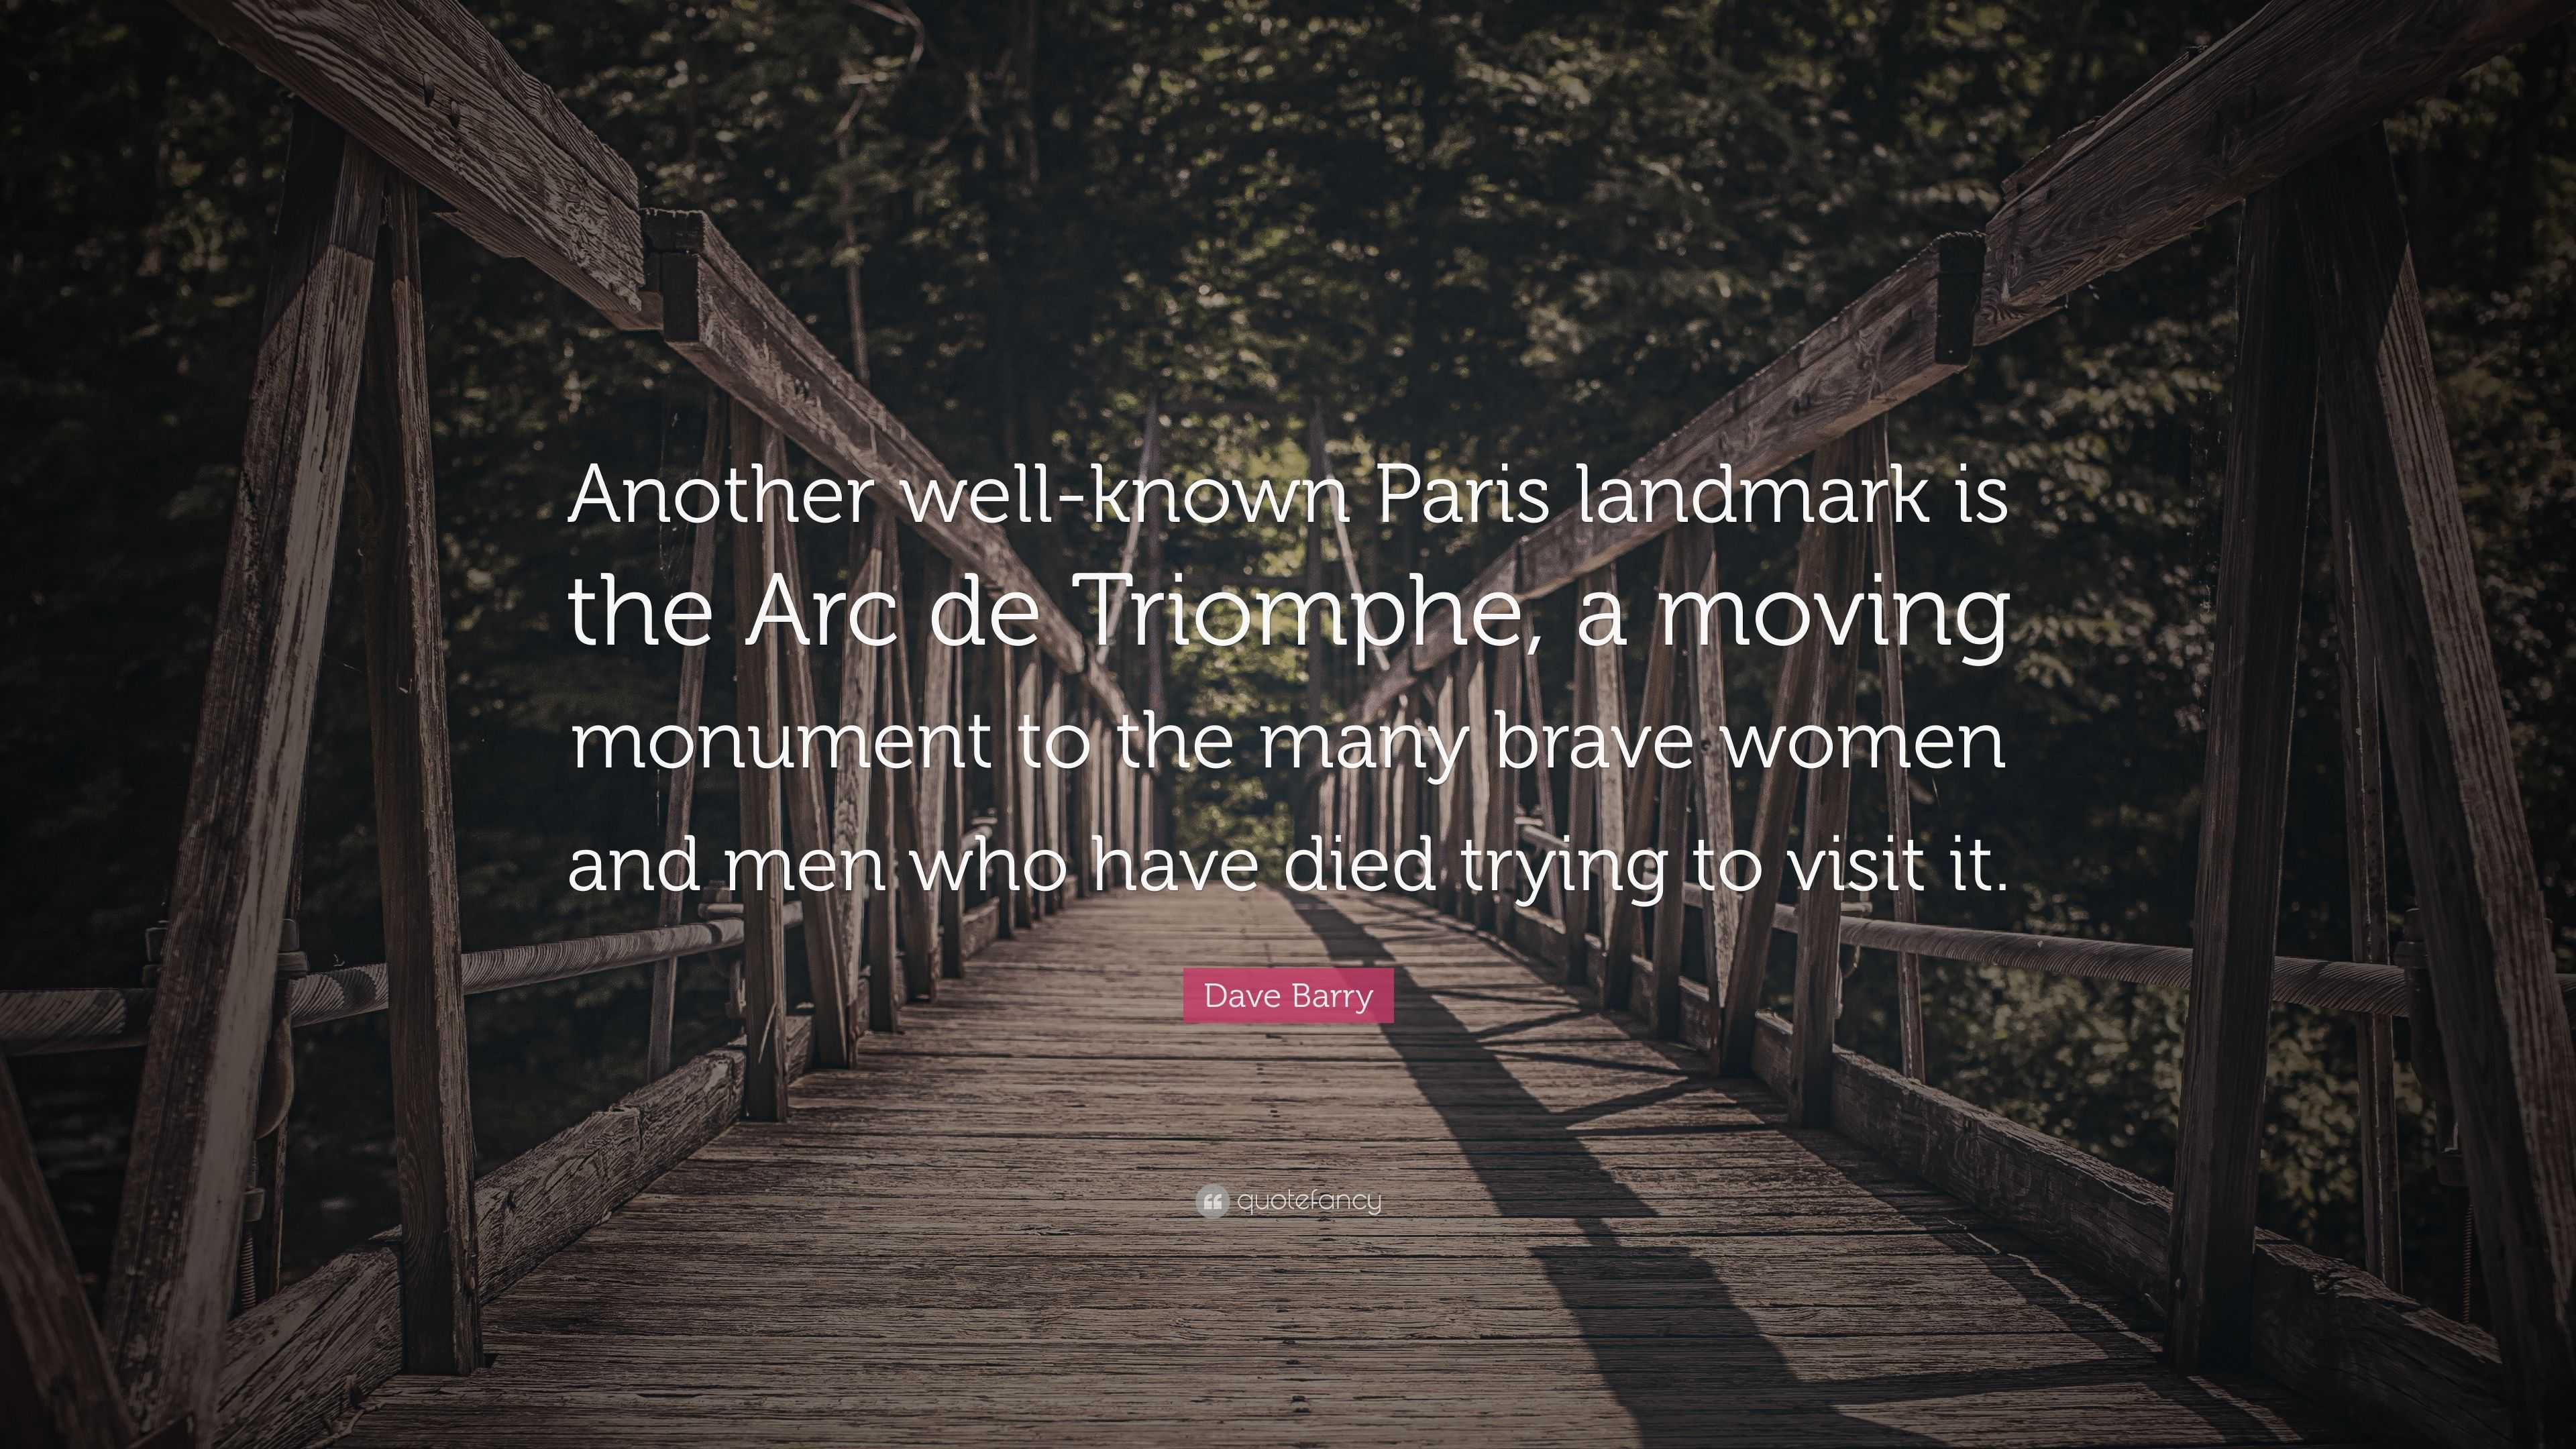 Dave Barry Quote: “Another well-known Paris landmark is the Arc de